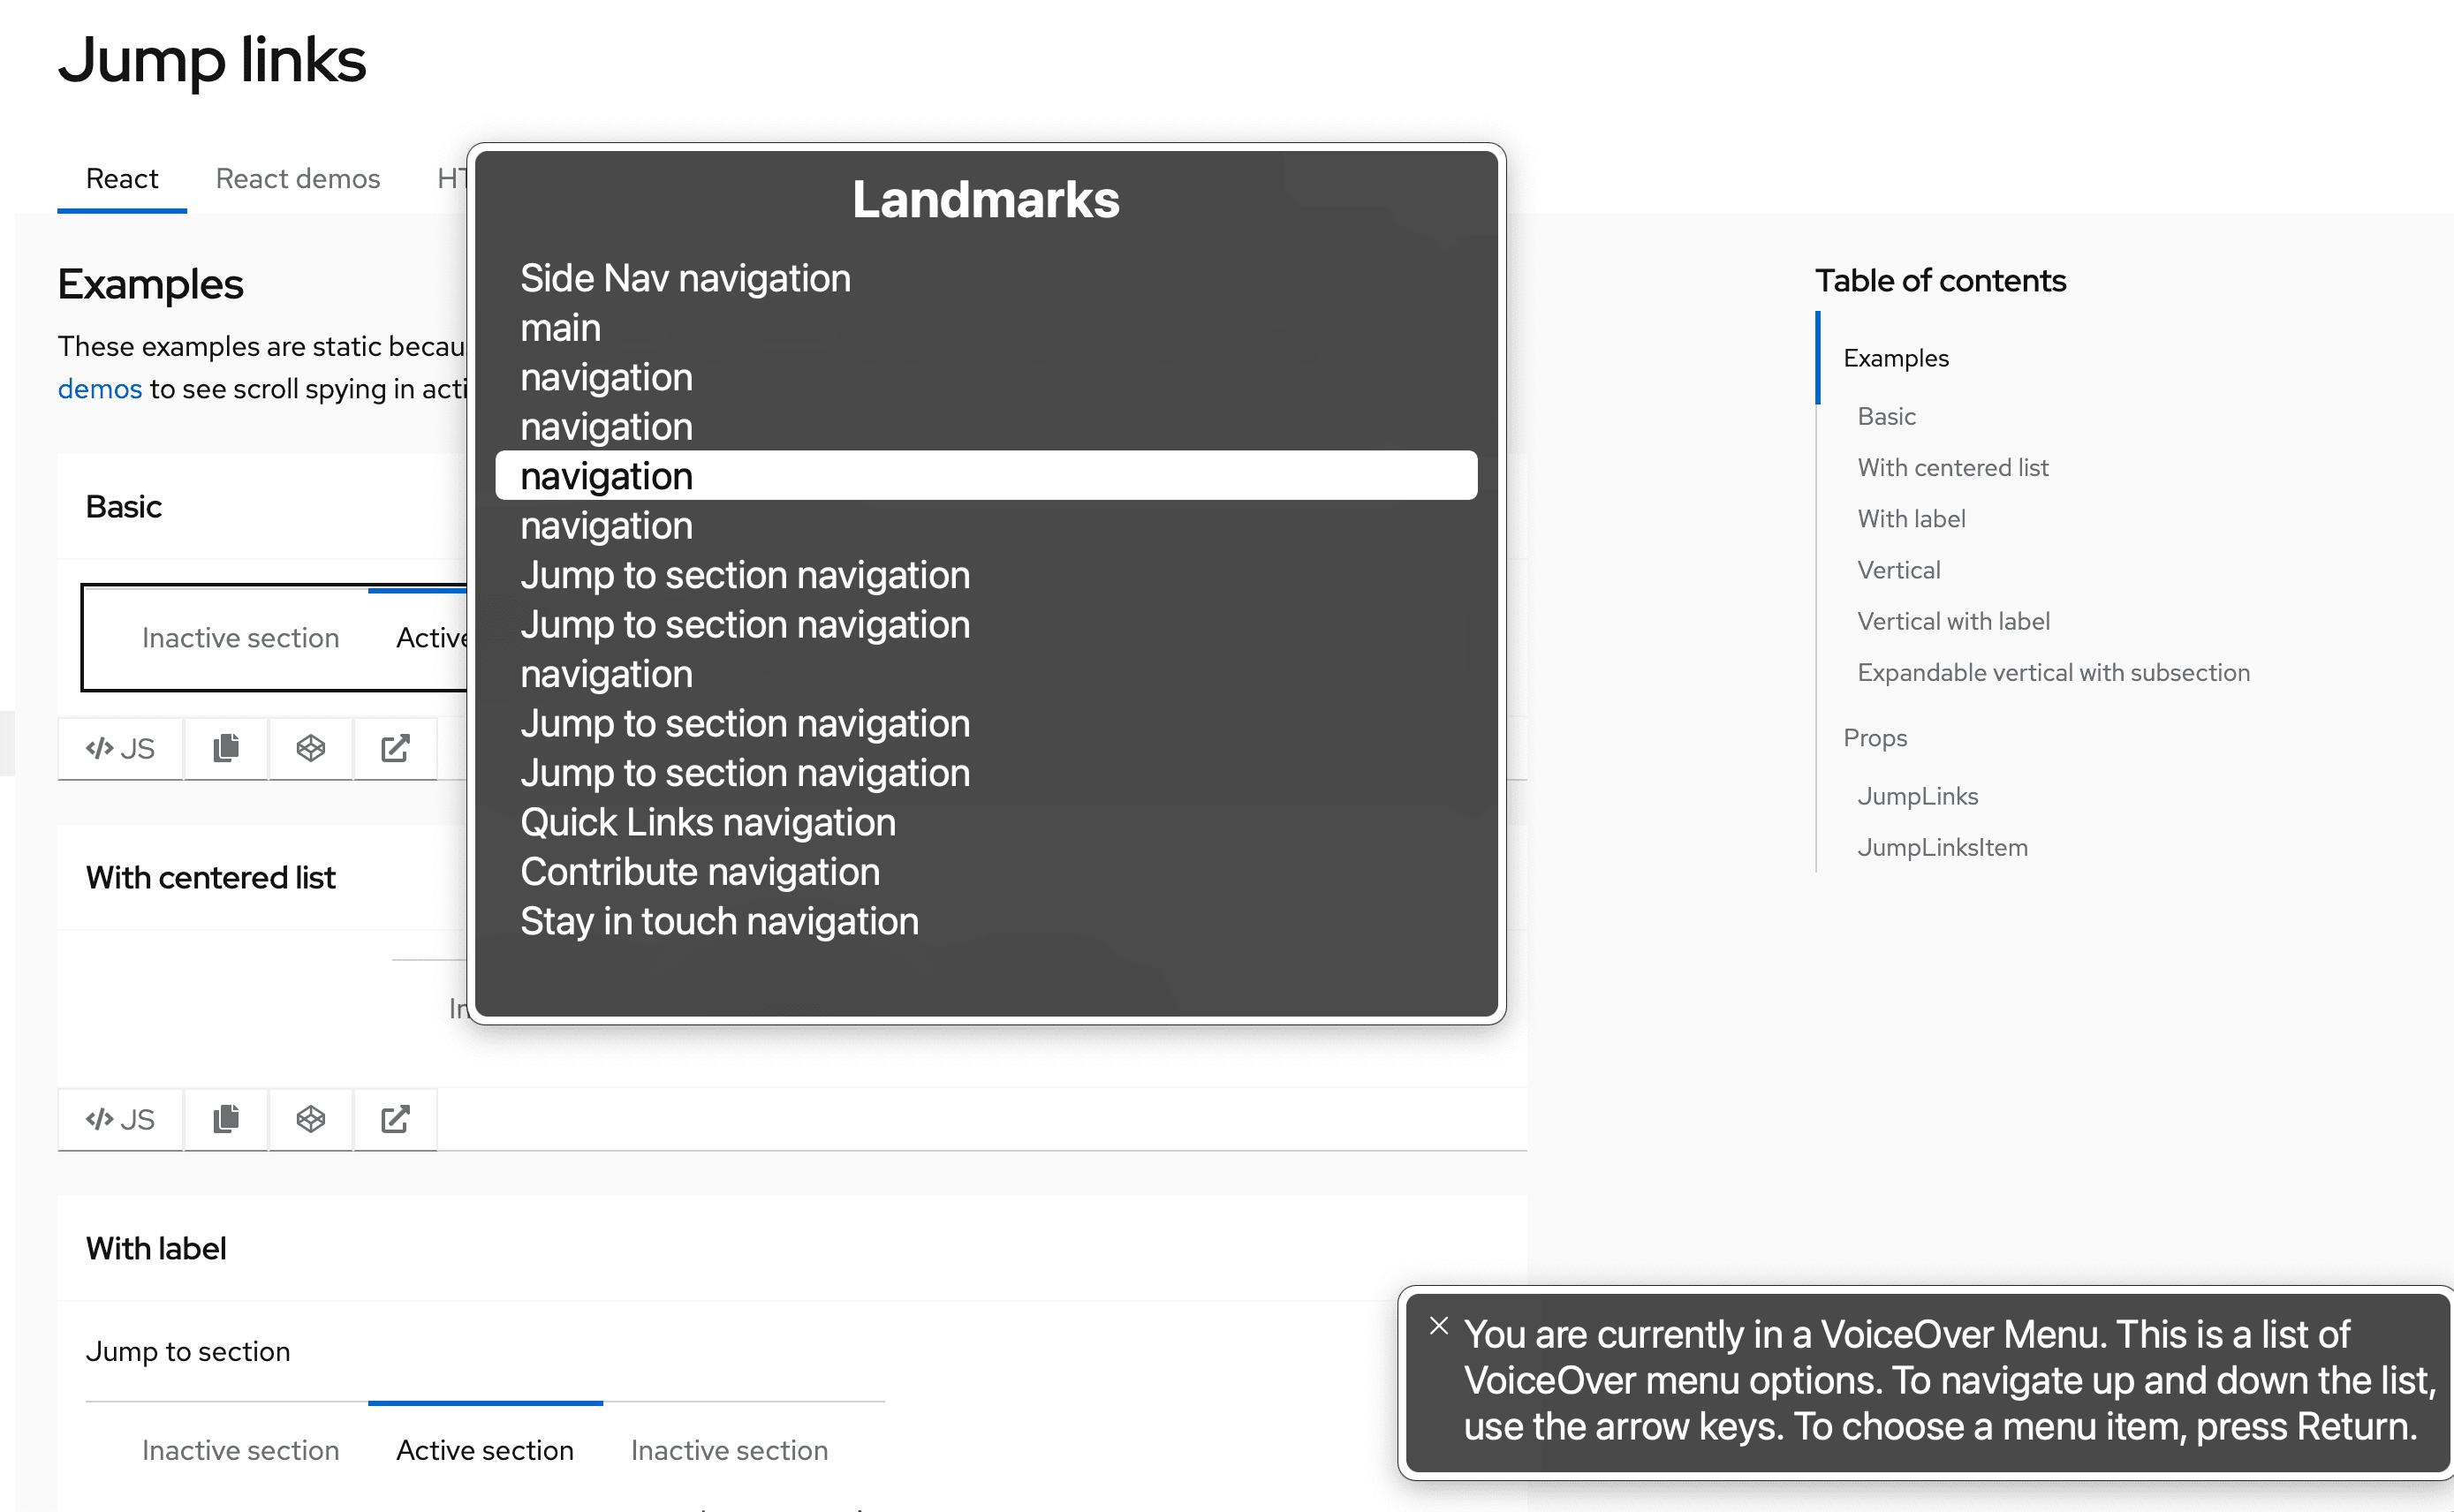 An example of a rotor menu interface which demonstrates that each navigation element is 
indistinguishable from the others without aria-labels.